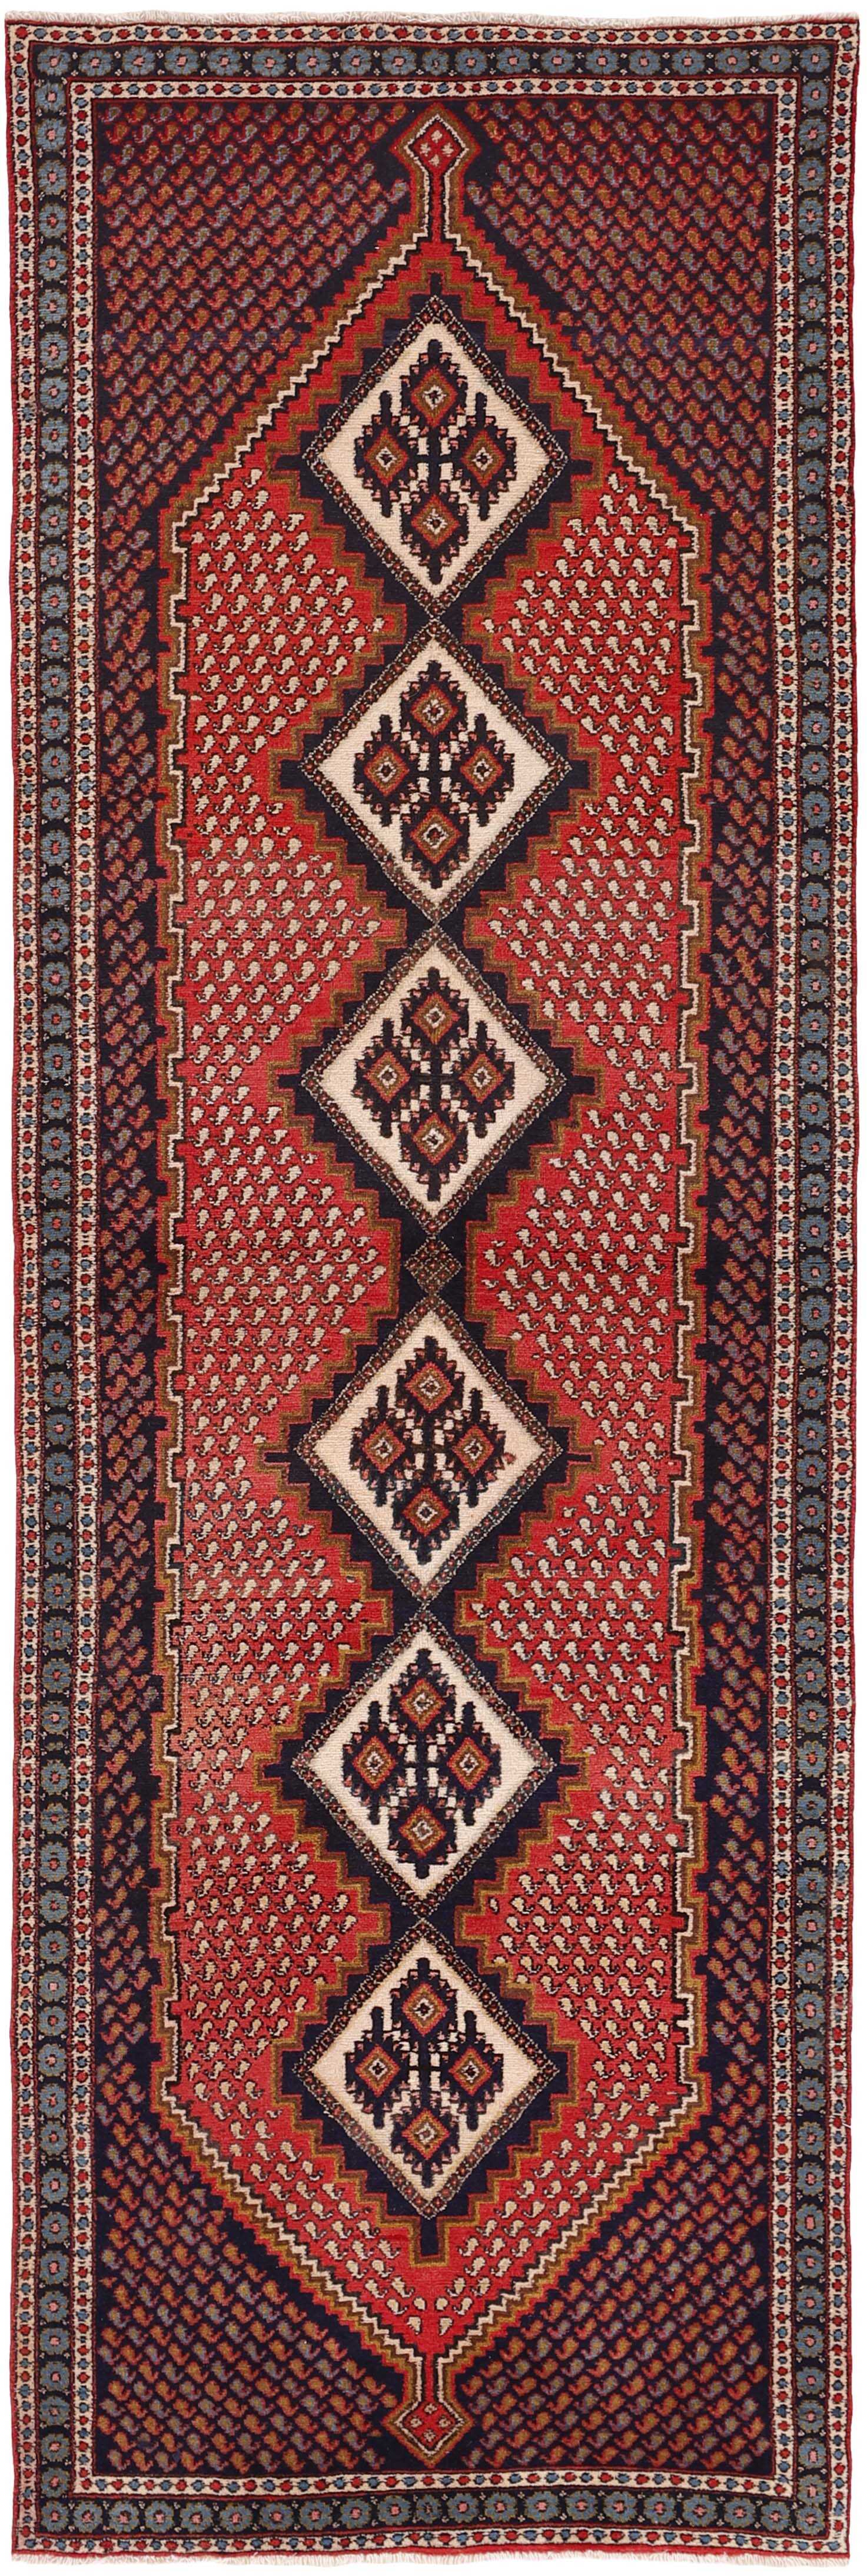 Authentic persian runner with a traditional design in red